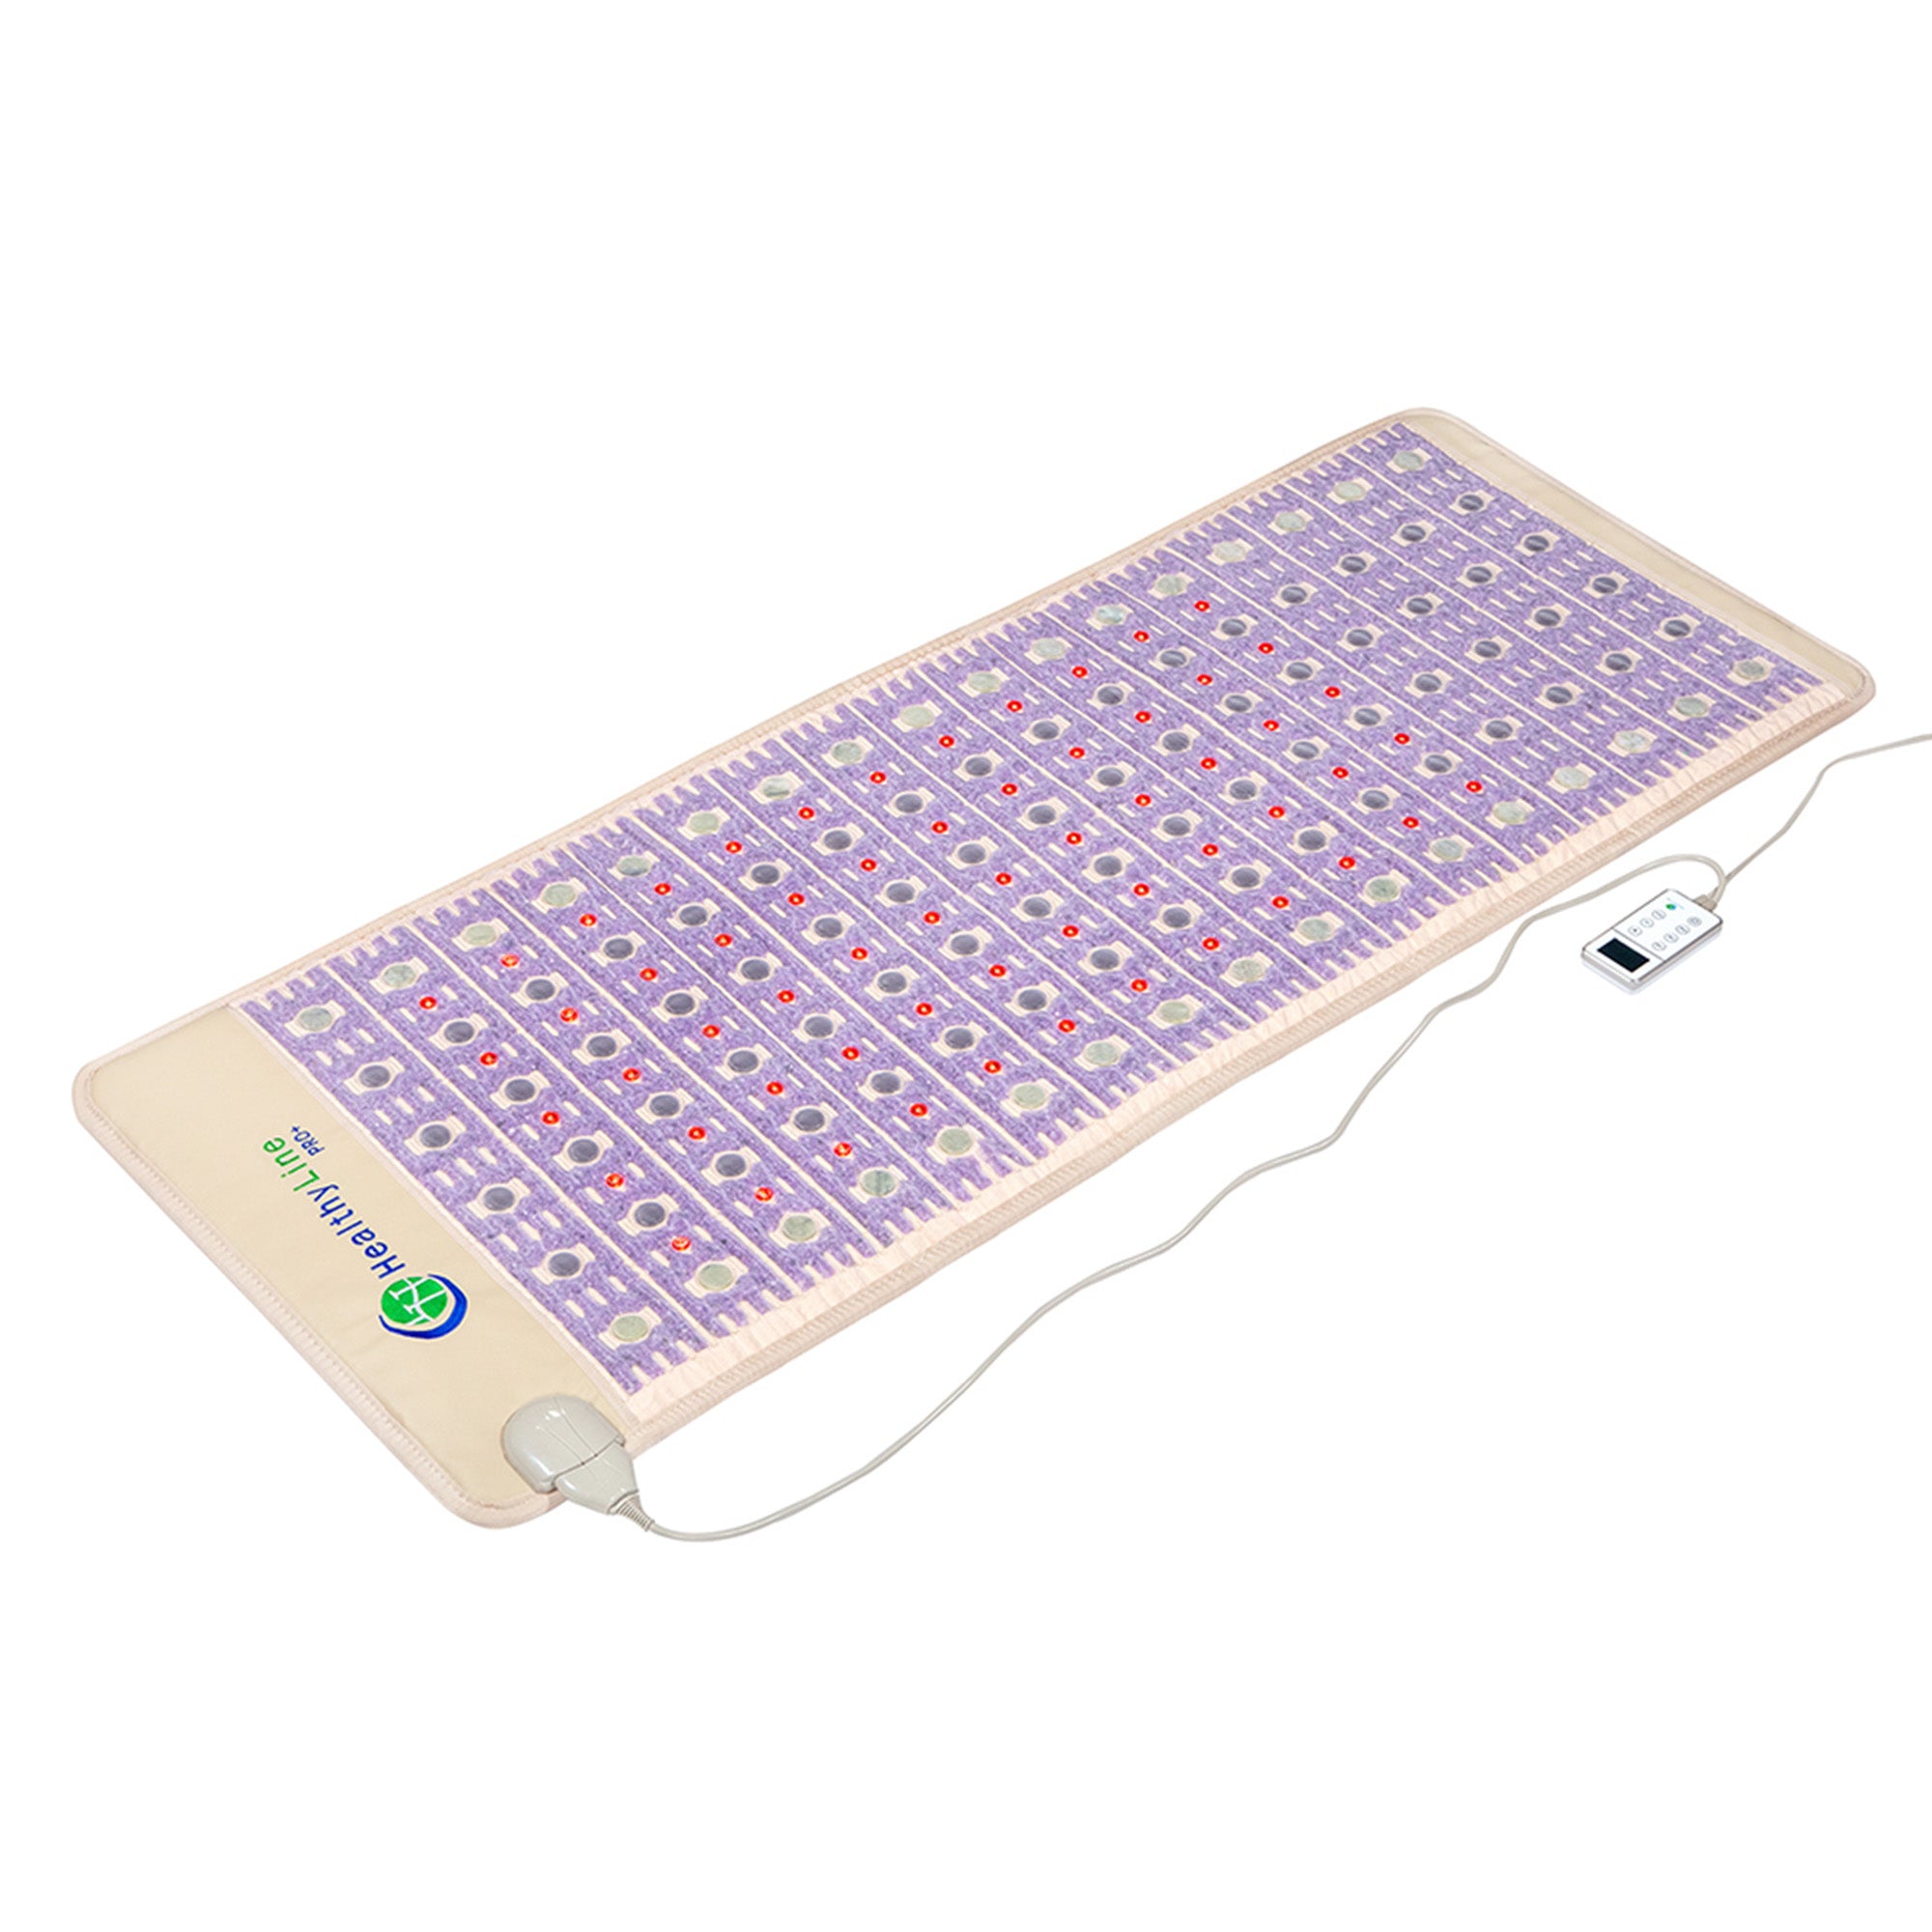 HealthyLine TAJ Mat Full Pro Plus 7428 with Photon LED and PEMF / FIRM